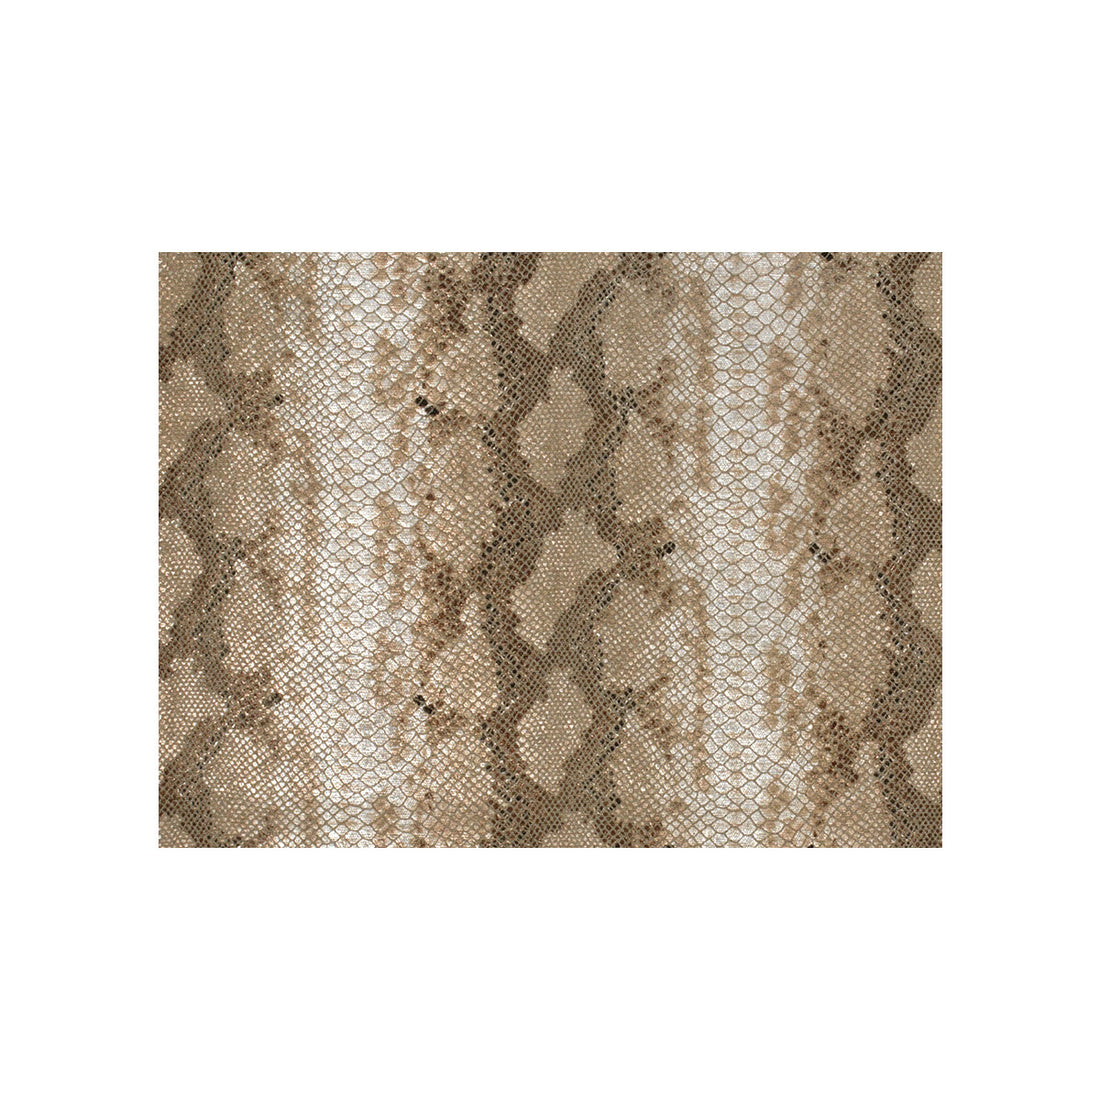 Serpent Natural fabric in linen color - pattern GWF-3114.616.0 - by Lee Jofa Modern in the Kelly Wearstler II collection